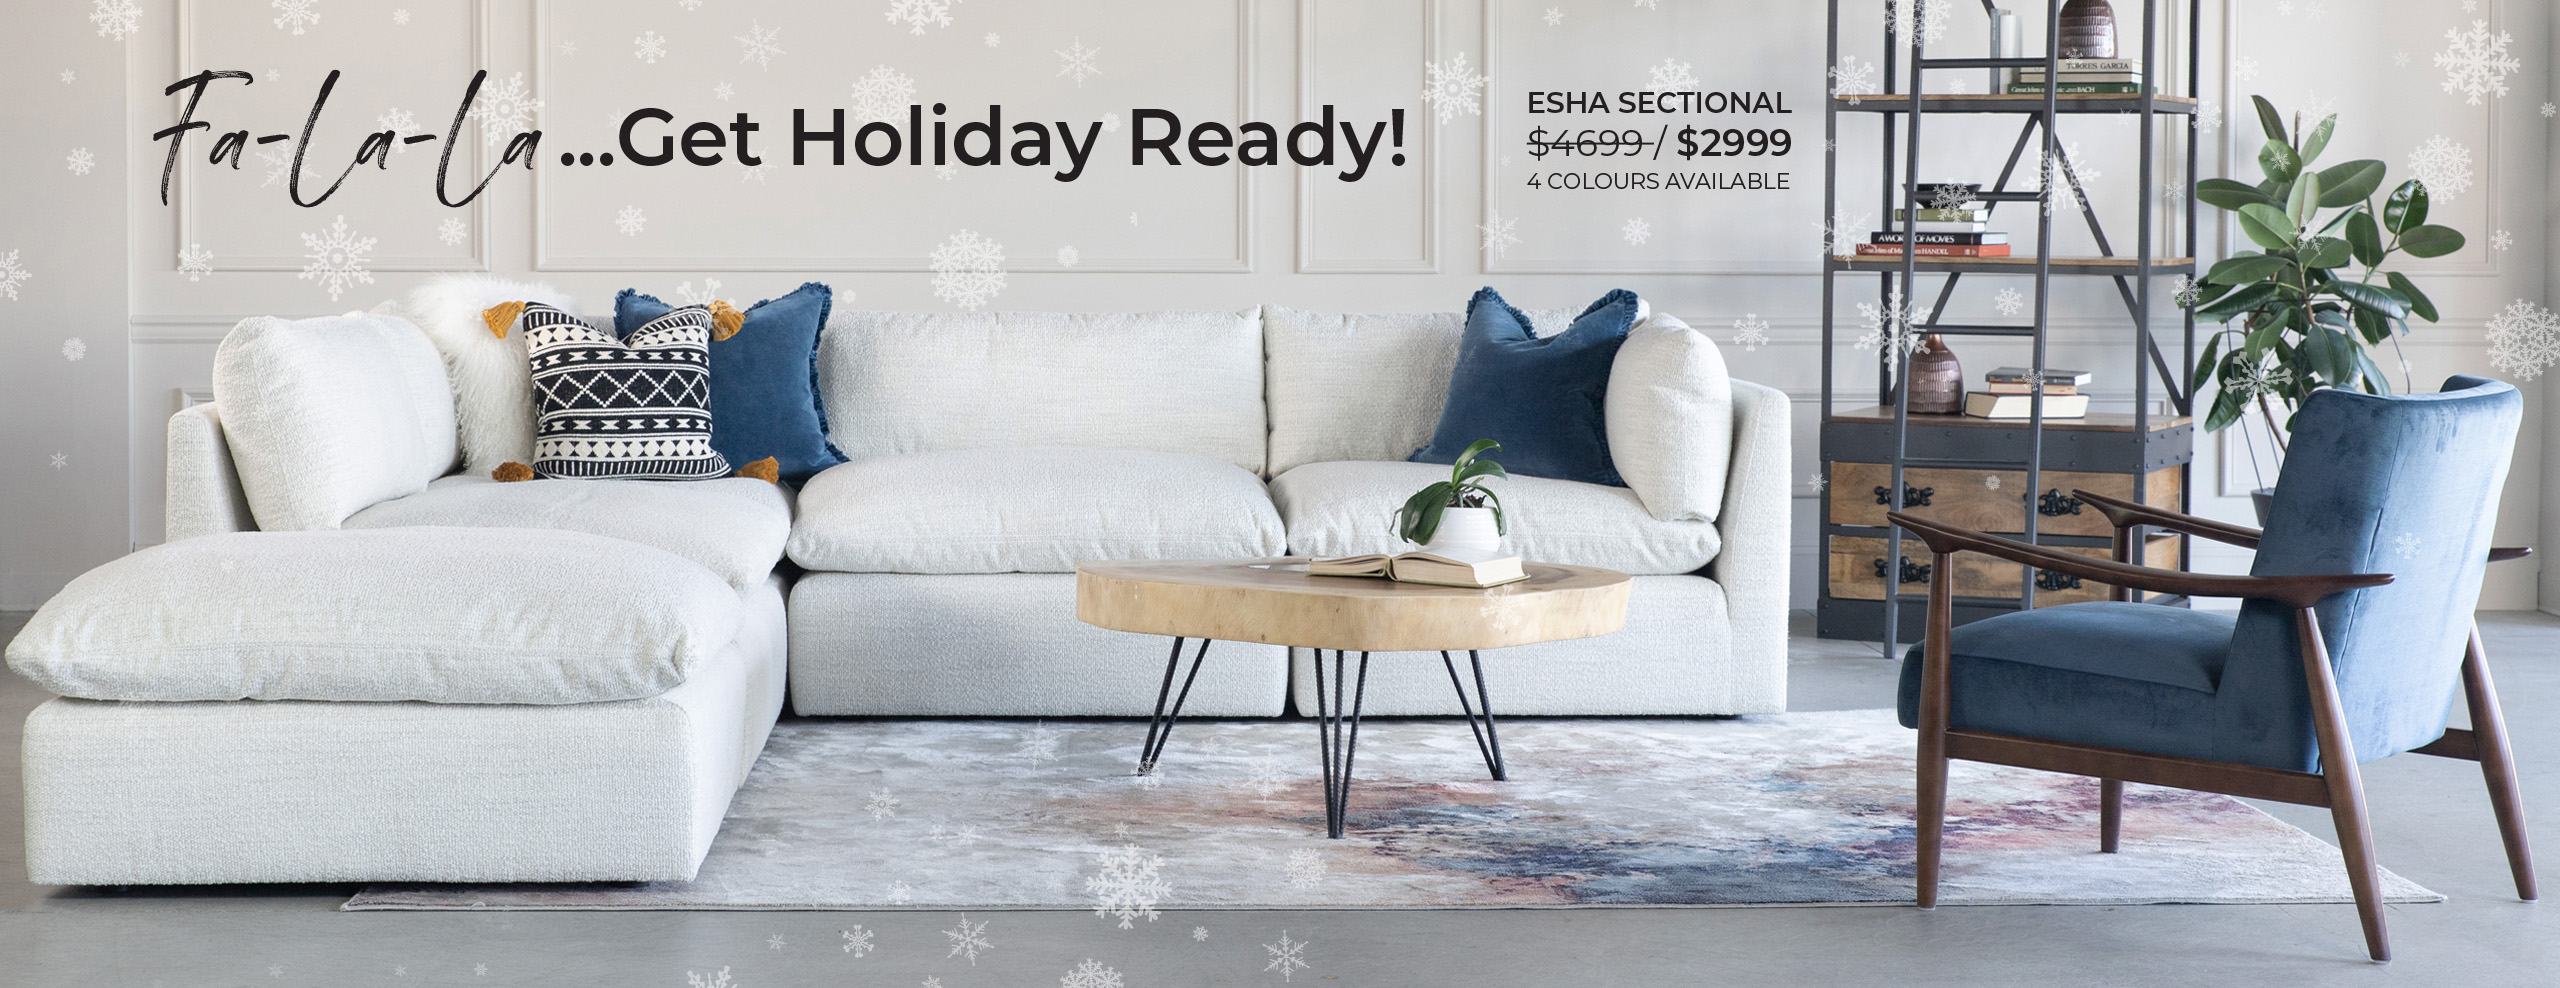 Get Holiday Ready!